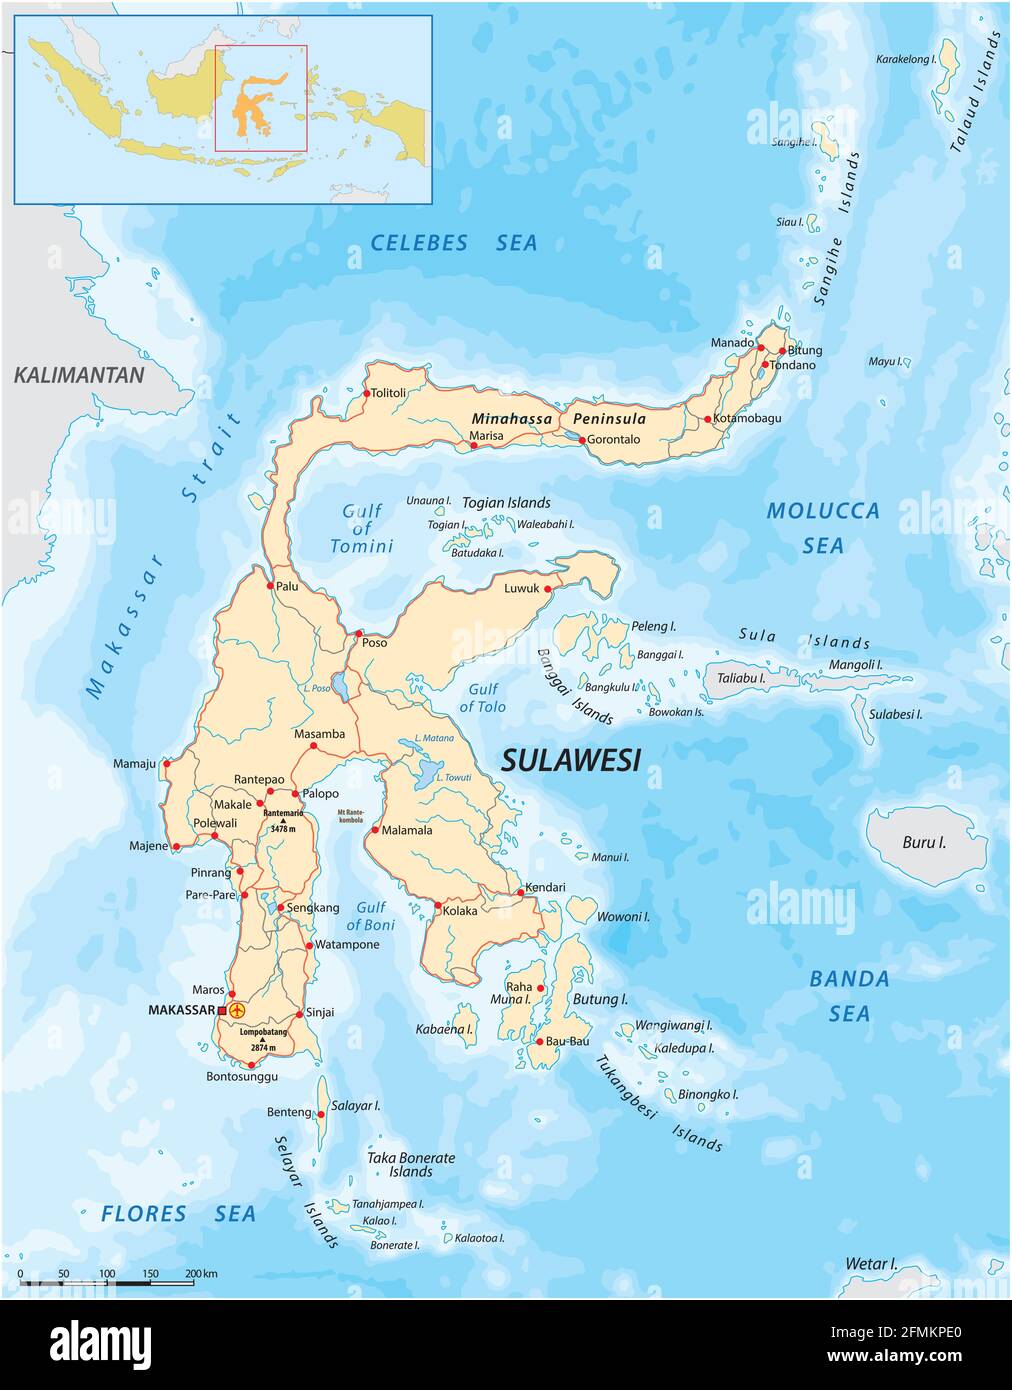 Vector road map of the Greater Sunda Island Sulawesi, Indonesia Stock Vector